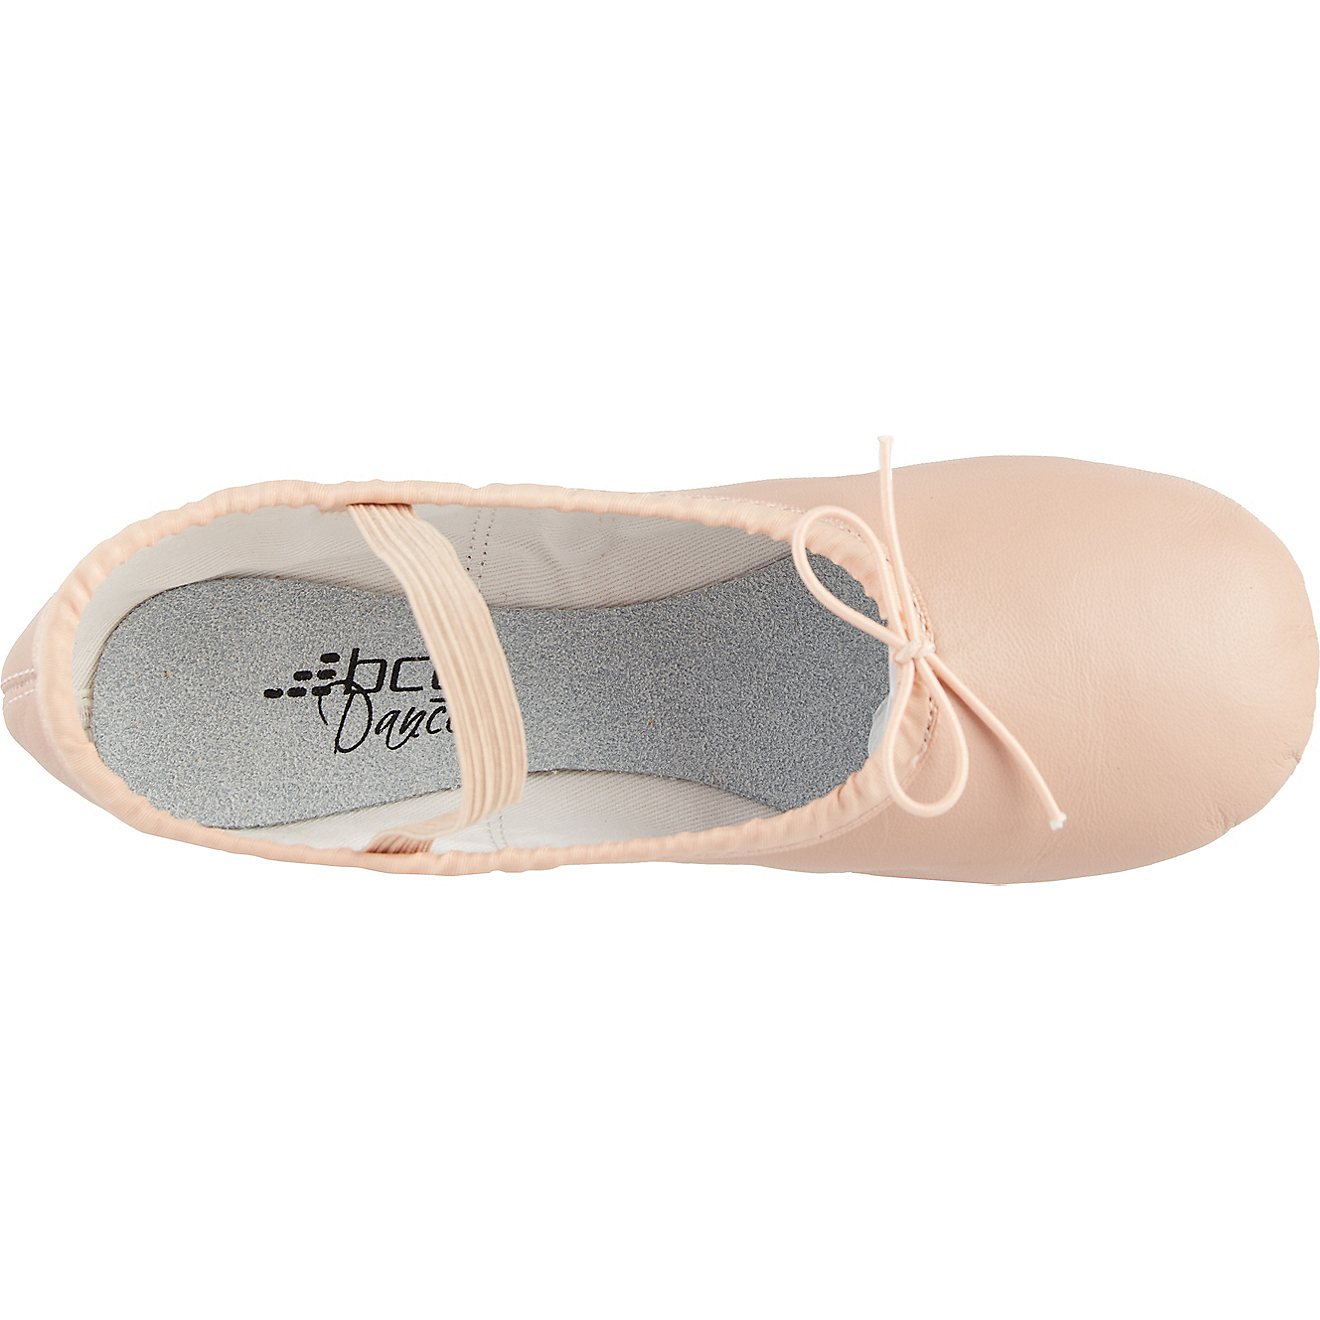 BCG Youth Dance Ballet Shoes                                                                                                     - view number 3